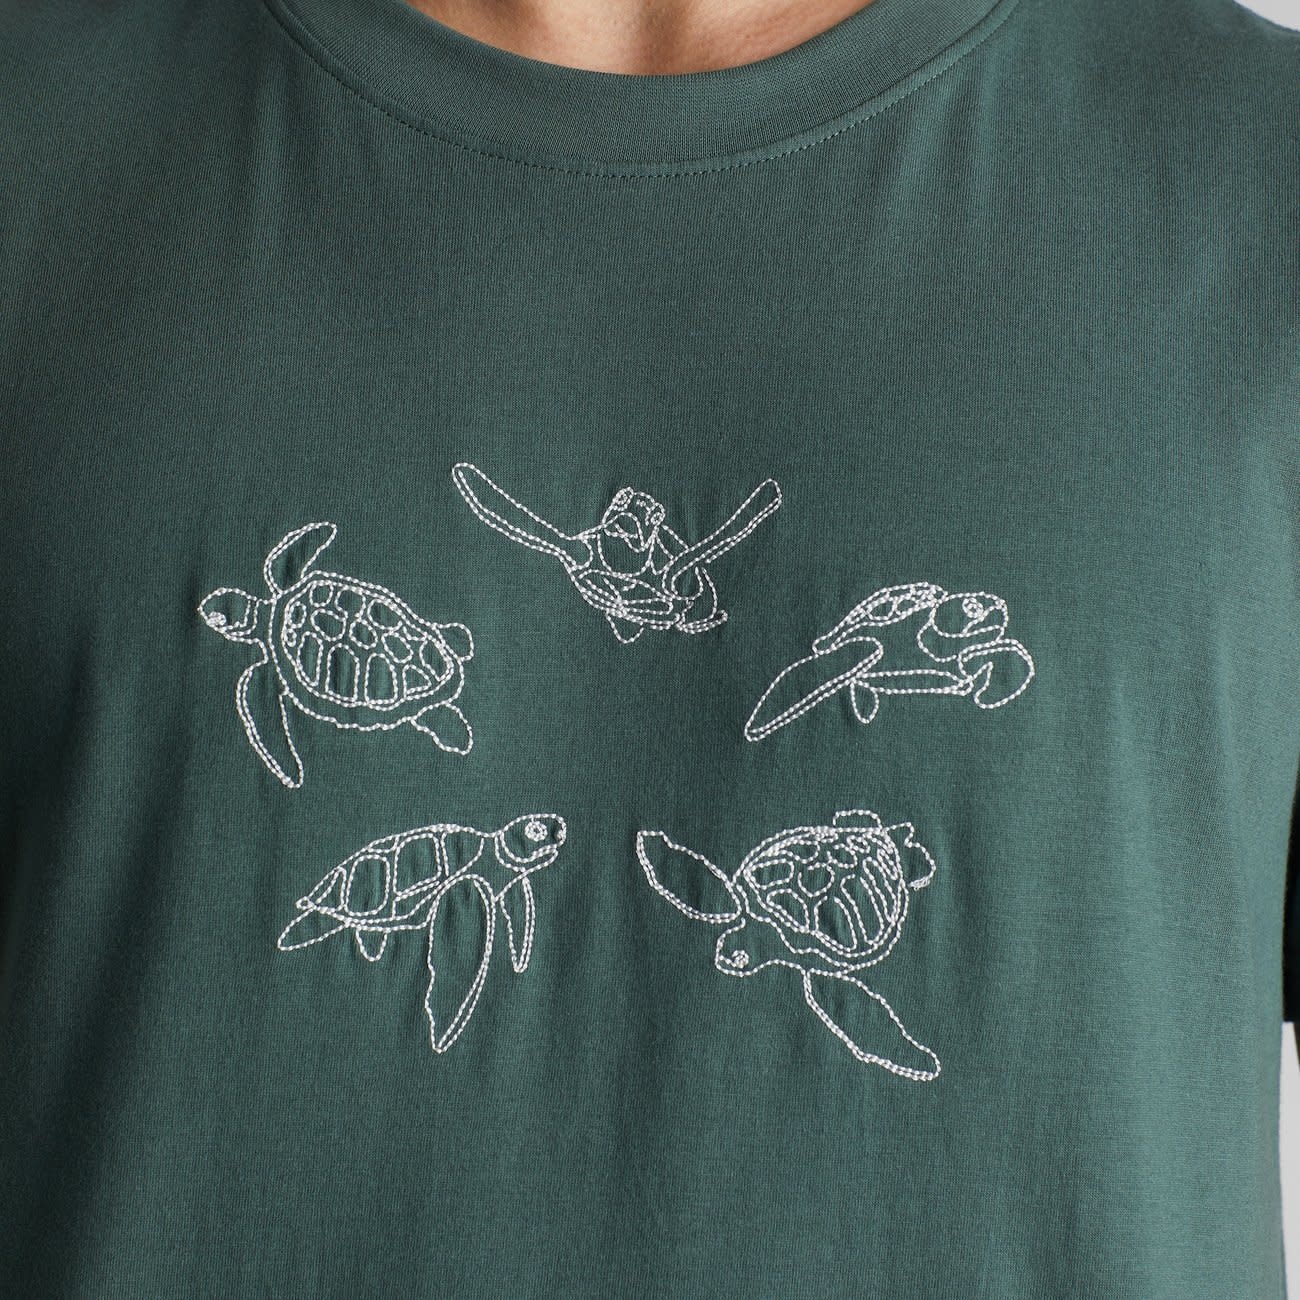 Dedicated Dedicated, Stockholm Sea Turtles, forest green, XL